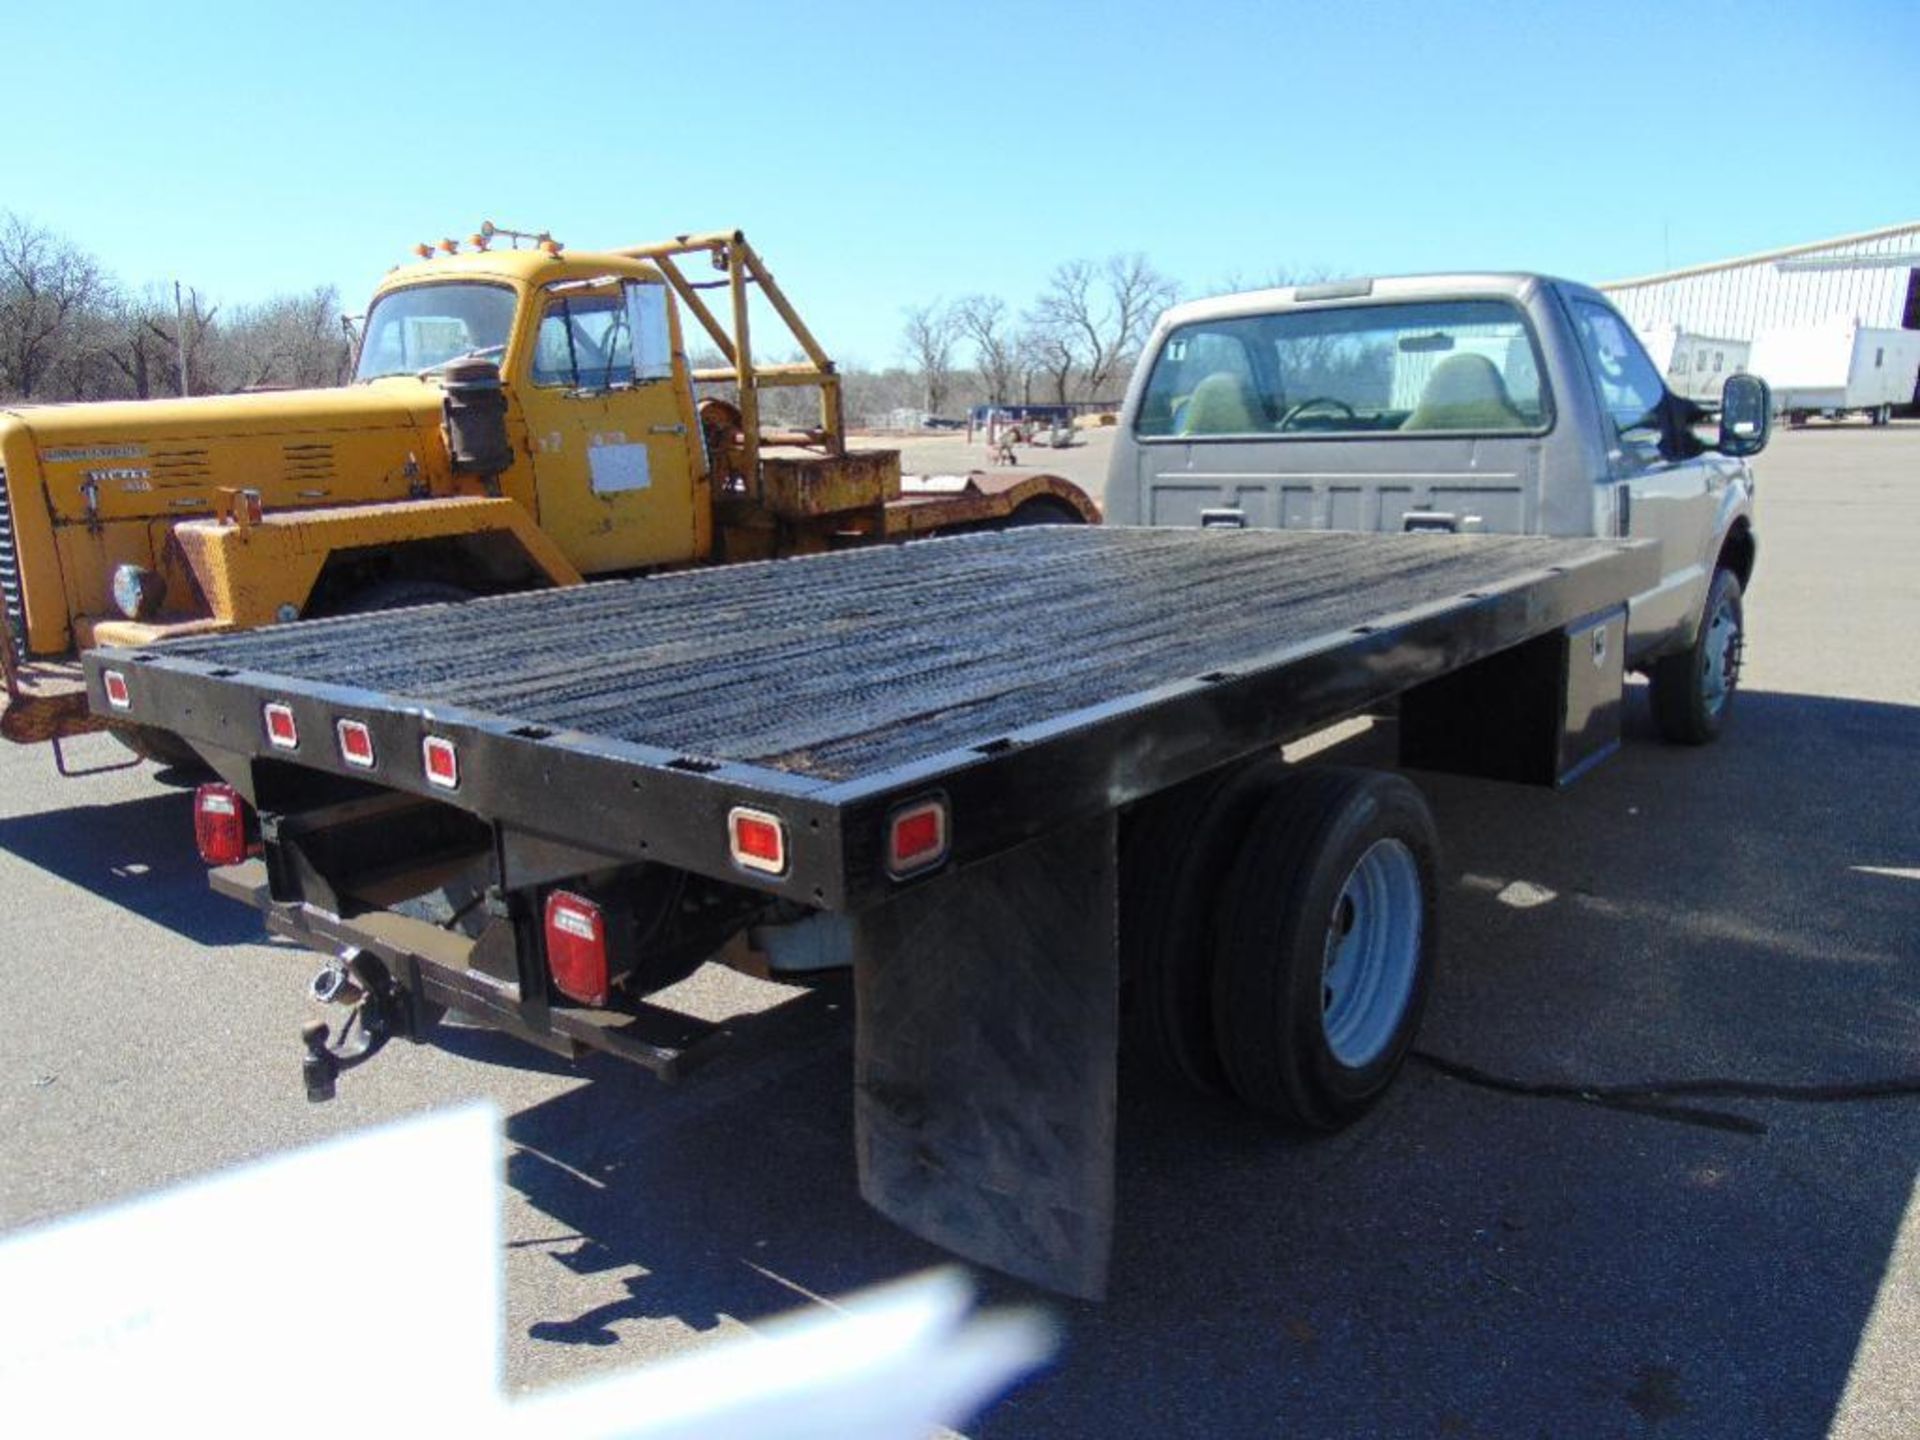 2004 Ford F450 Flatbed Truck s/n 1fdxf46s84ec92241, 6.8L eng, auto trans, 12"x8" Bed, odometer reads - Image 3 of 6